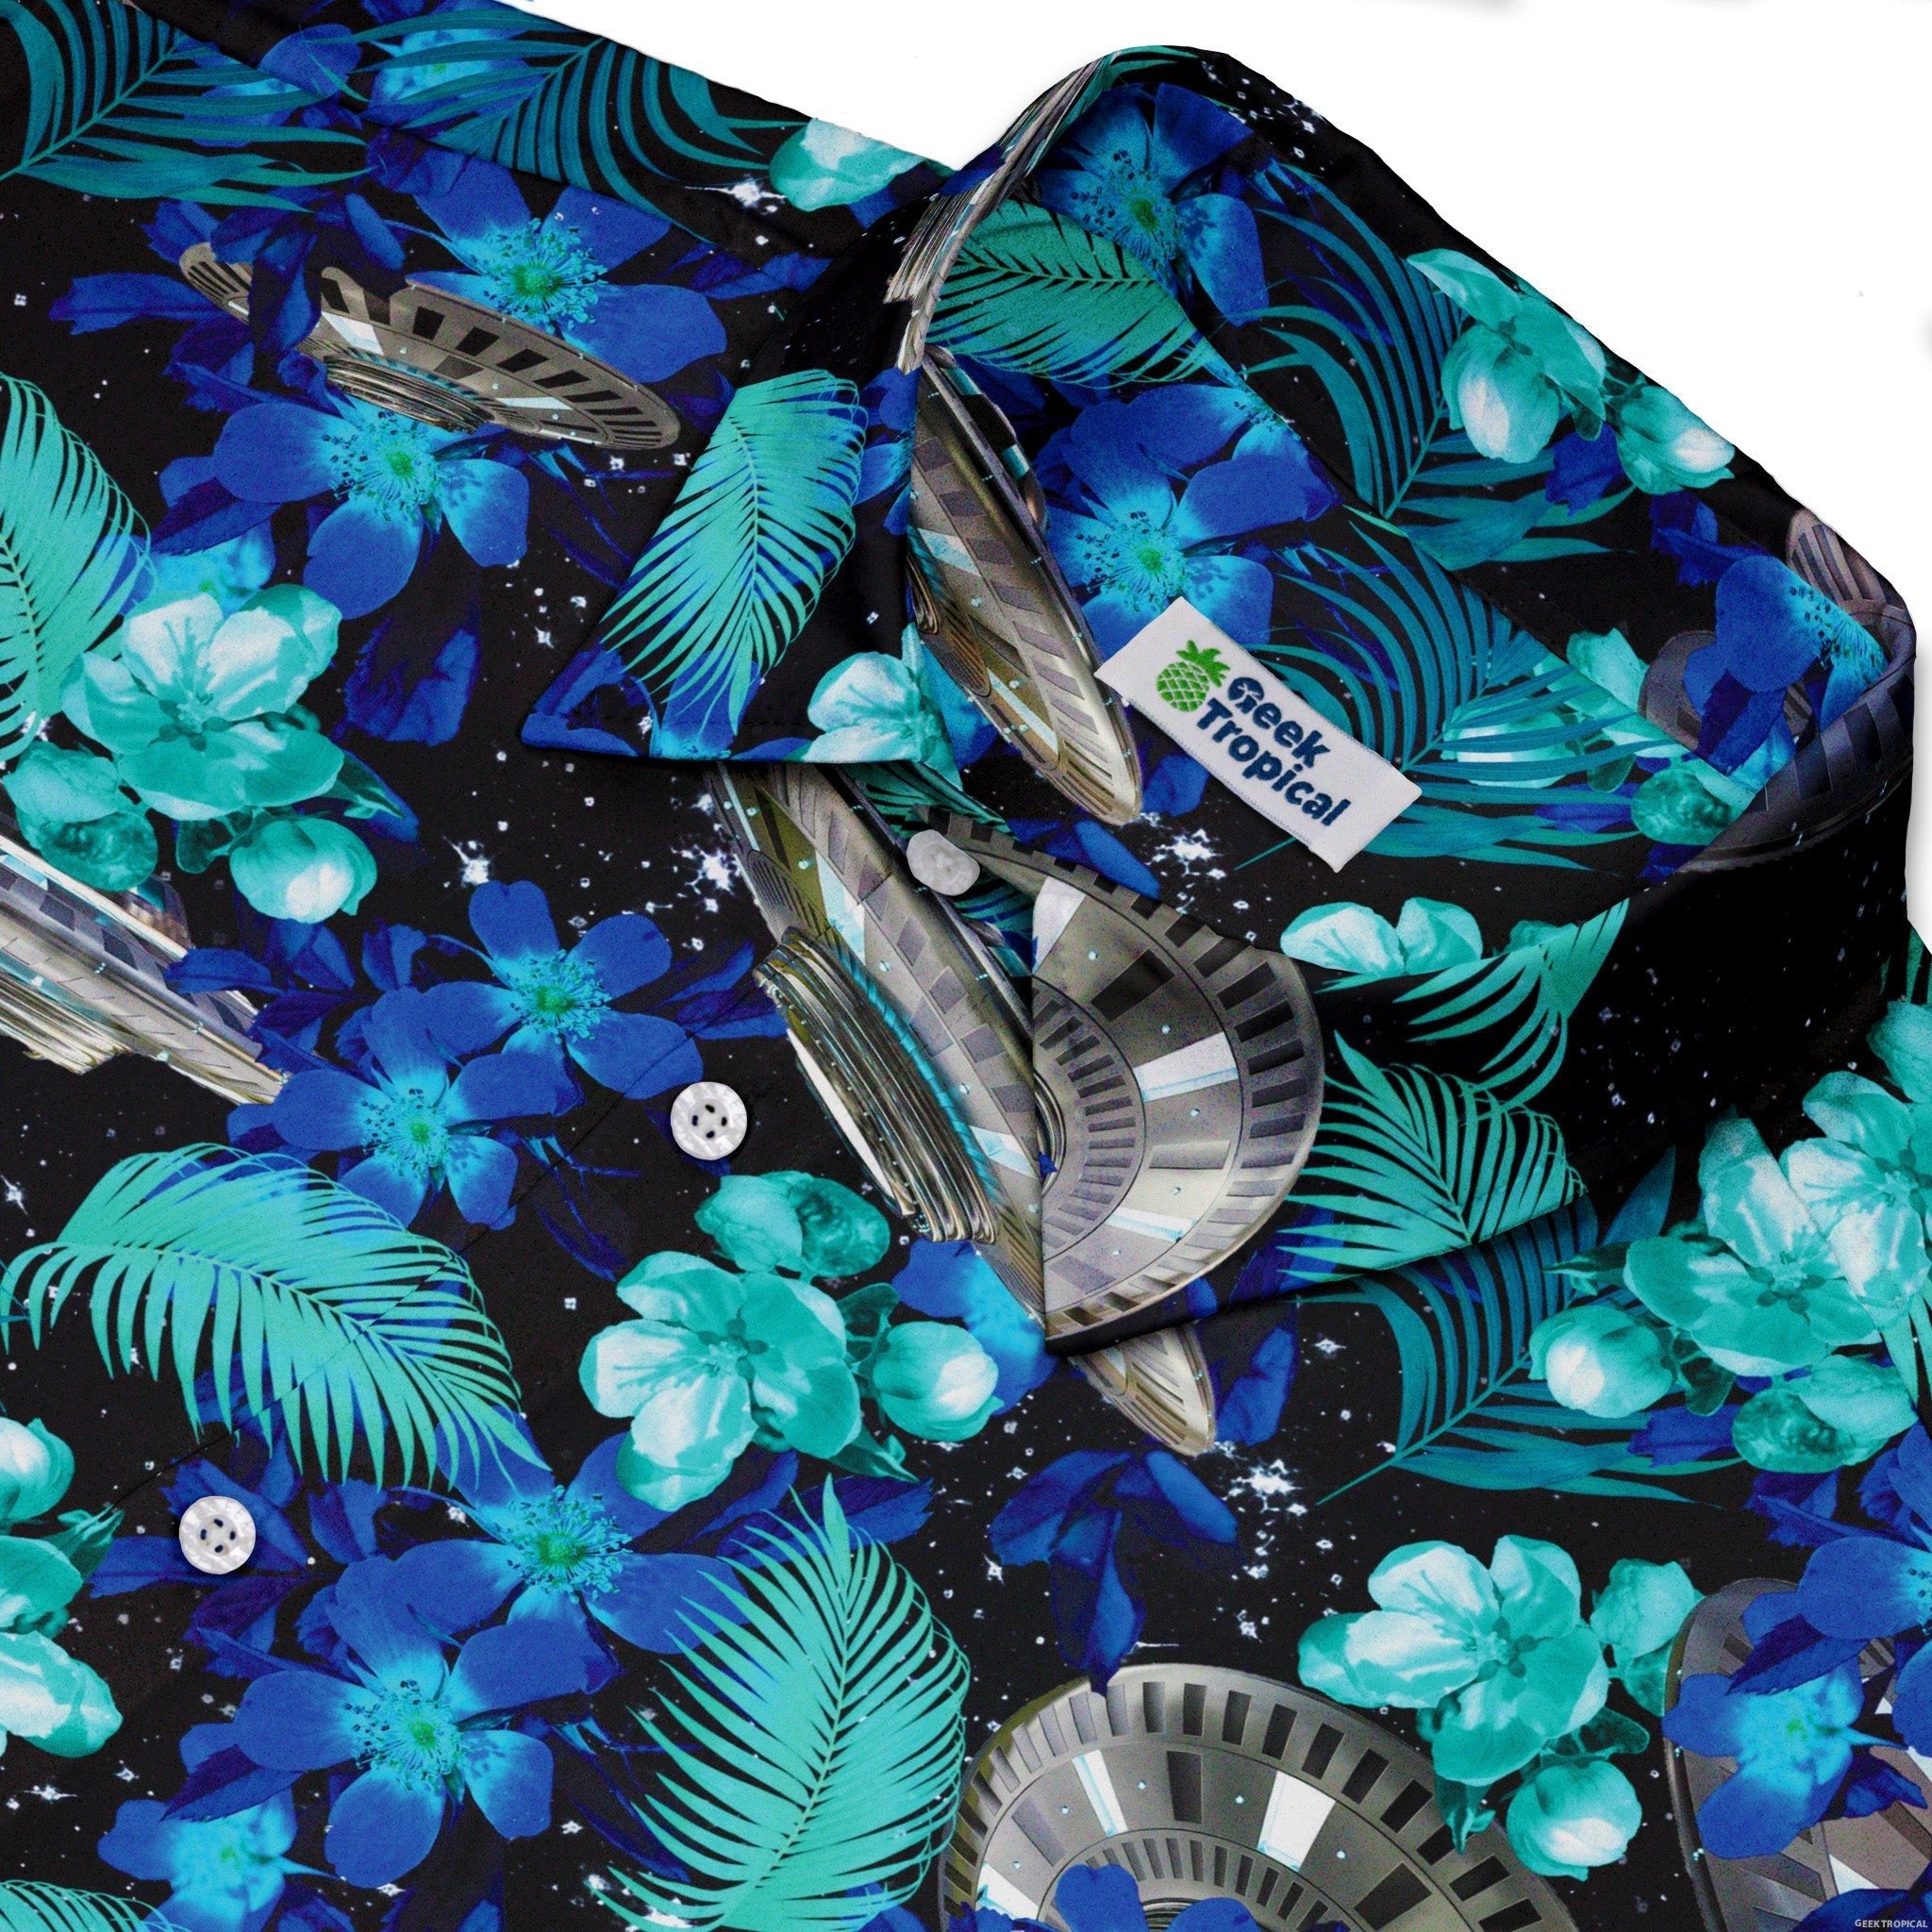 Tropical UFO Space Button Up Shirt - adult sizing - Design by Random Galaxy - Maximalist Patterns